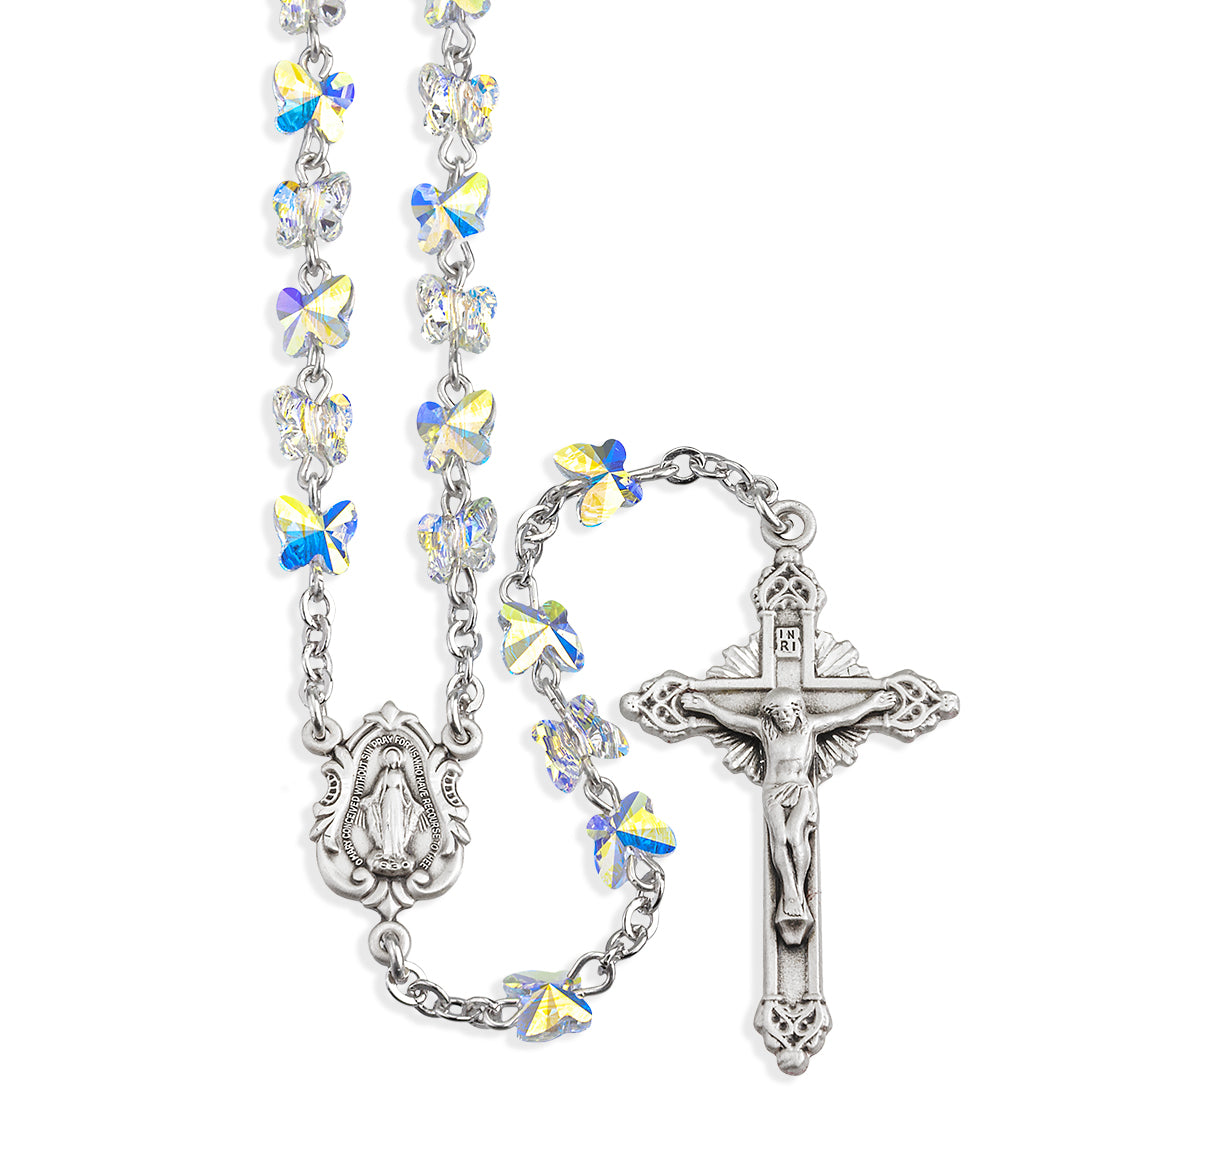 Rosary Sterling Crucifix and Centerpiece Created with Swarovski Crystal 6mm Butterfly Beads in Aurora Borealis by HMH